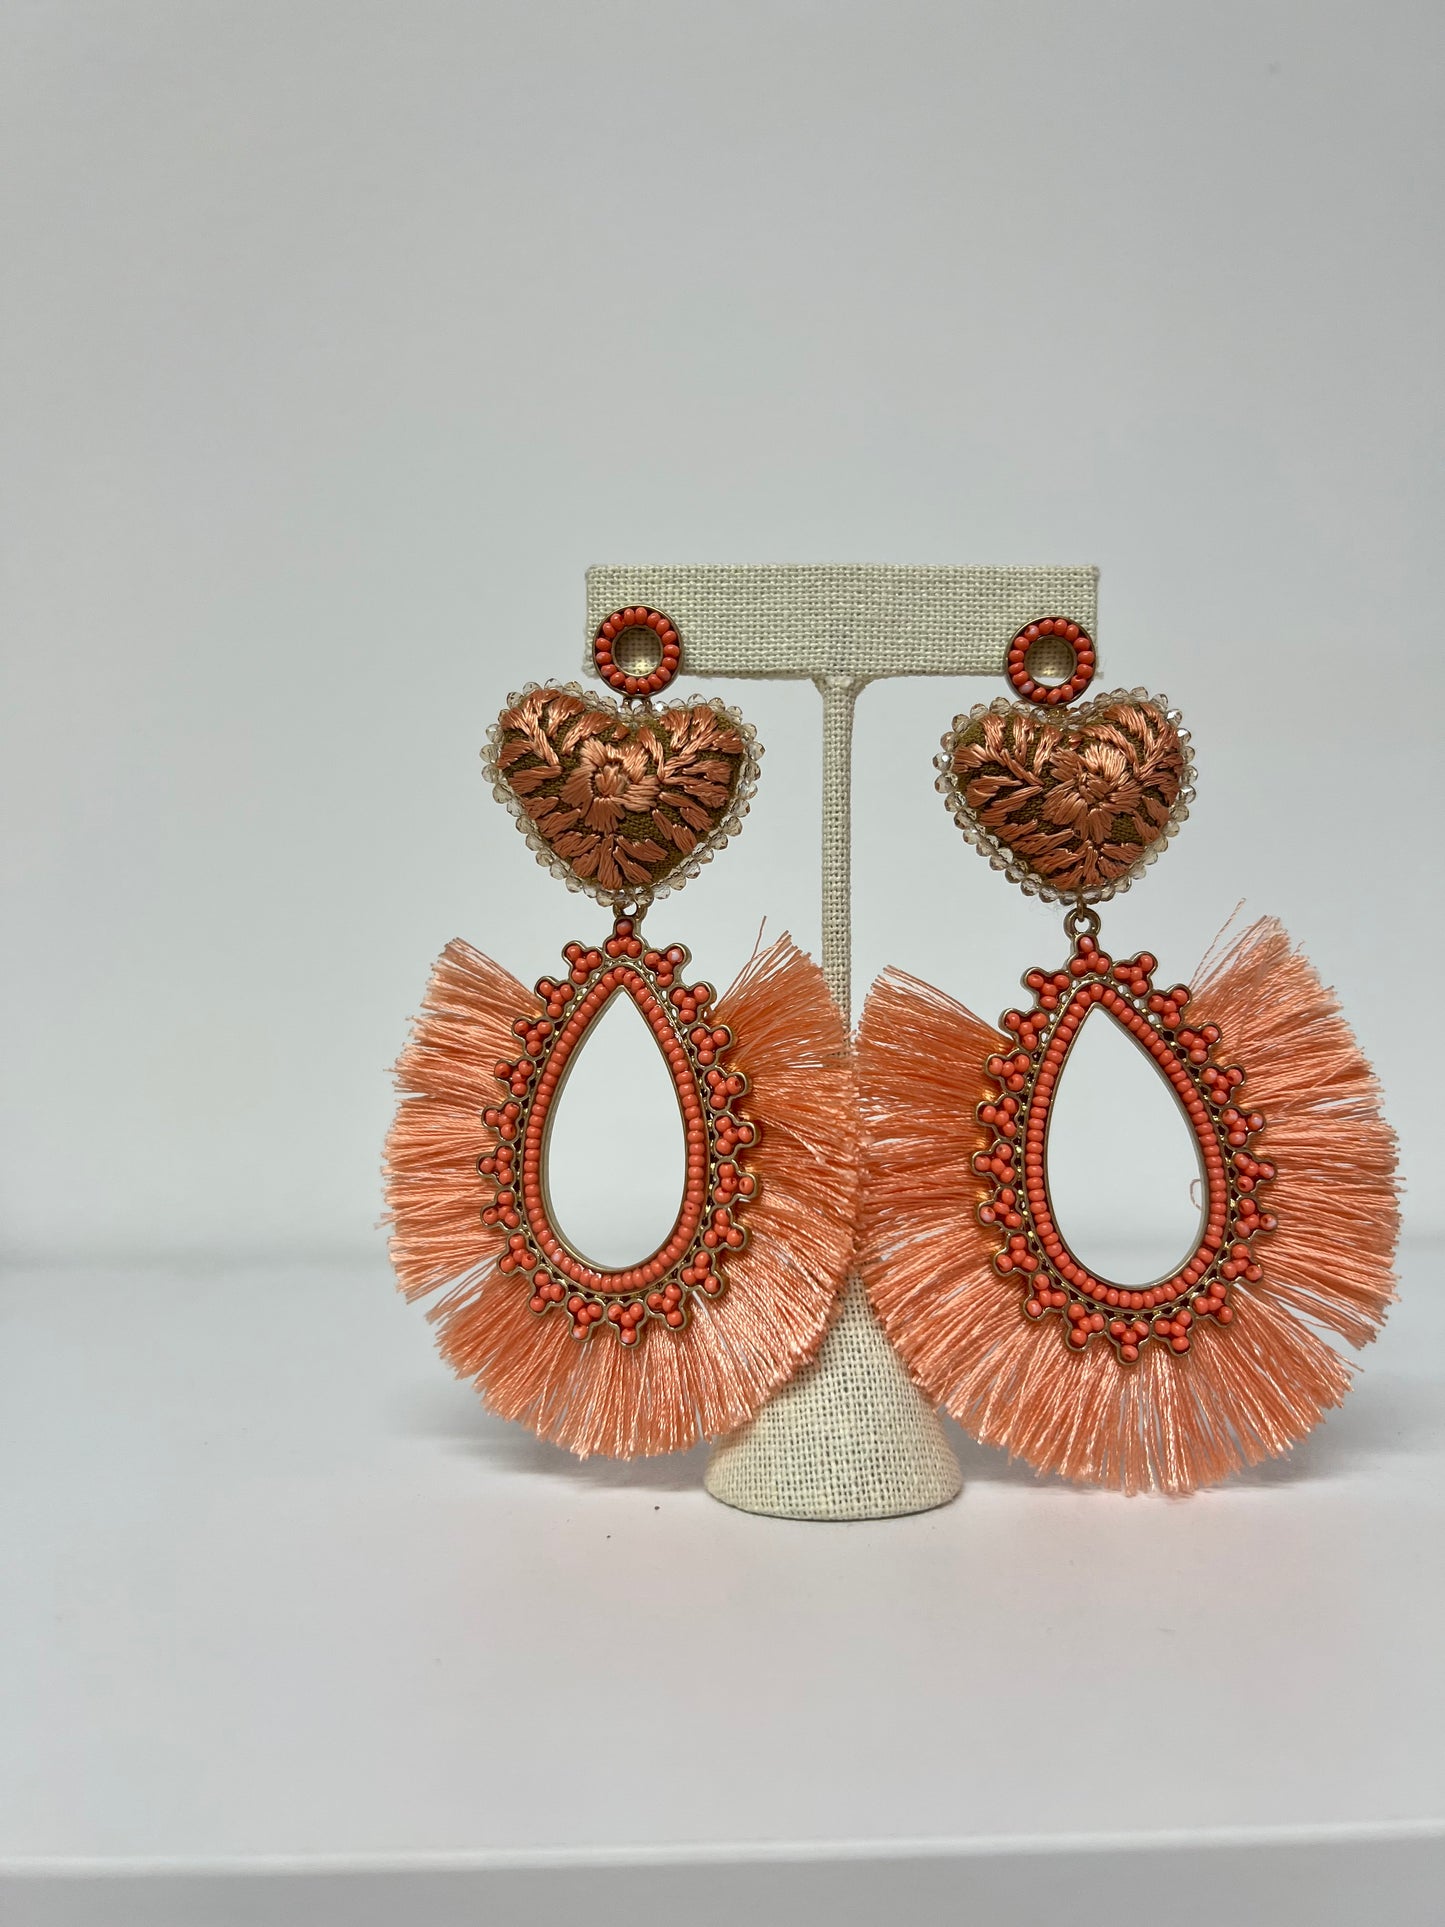 PEACH HEART EARRINGS WITH TASSEL AND GOLD EMBELLISHMENT